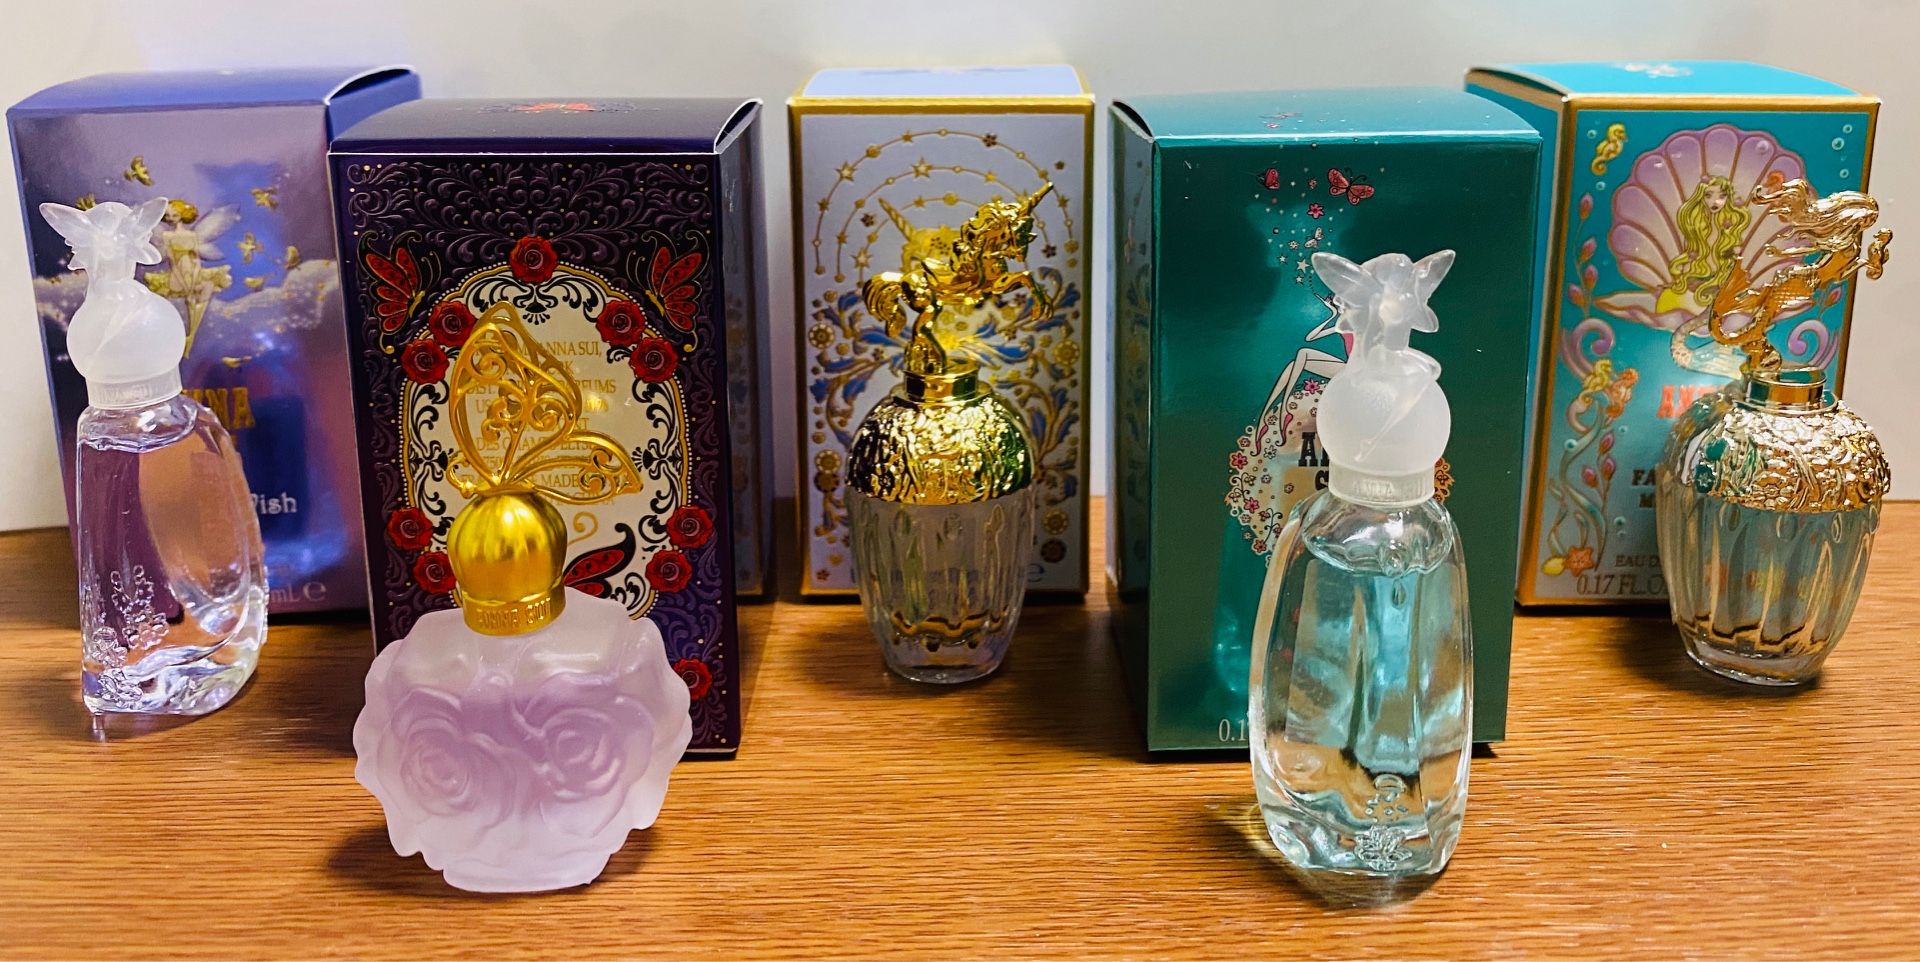 ANNA SUI 香水ミニボトルセット www.pegasusforkids.com